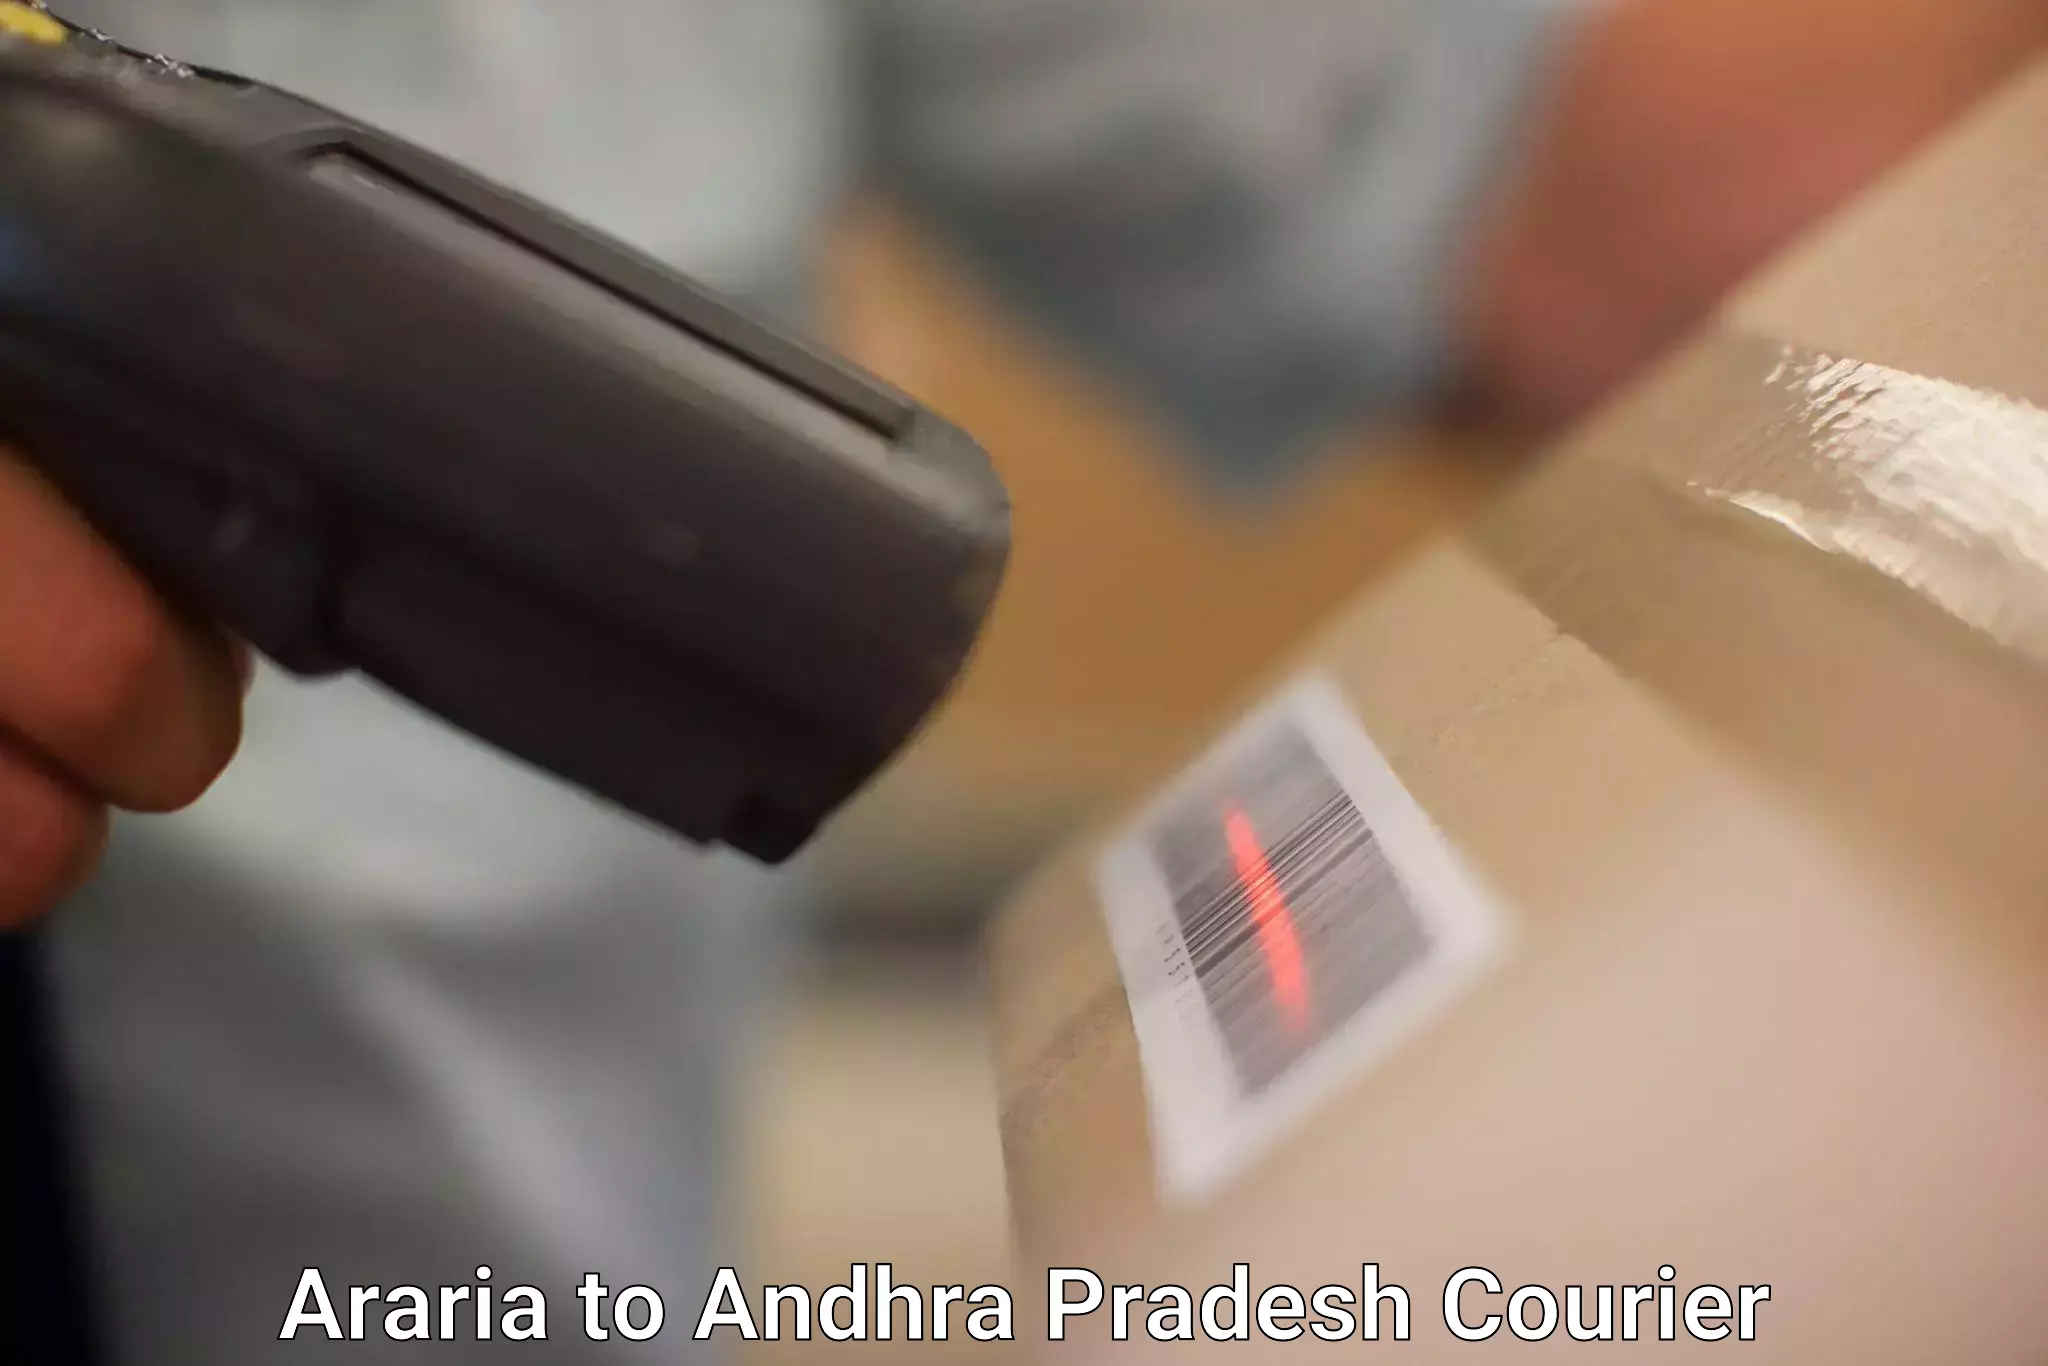 Urgent courier needs Araria to Dhone